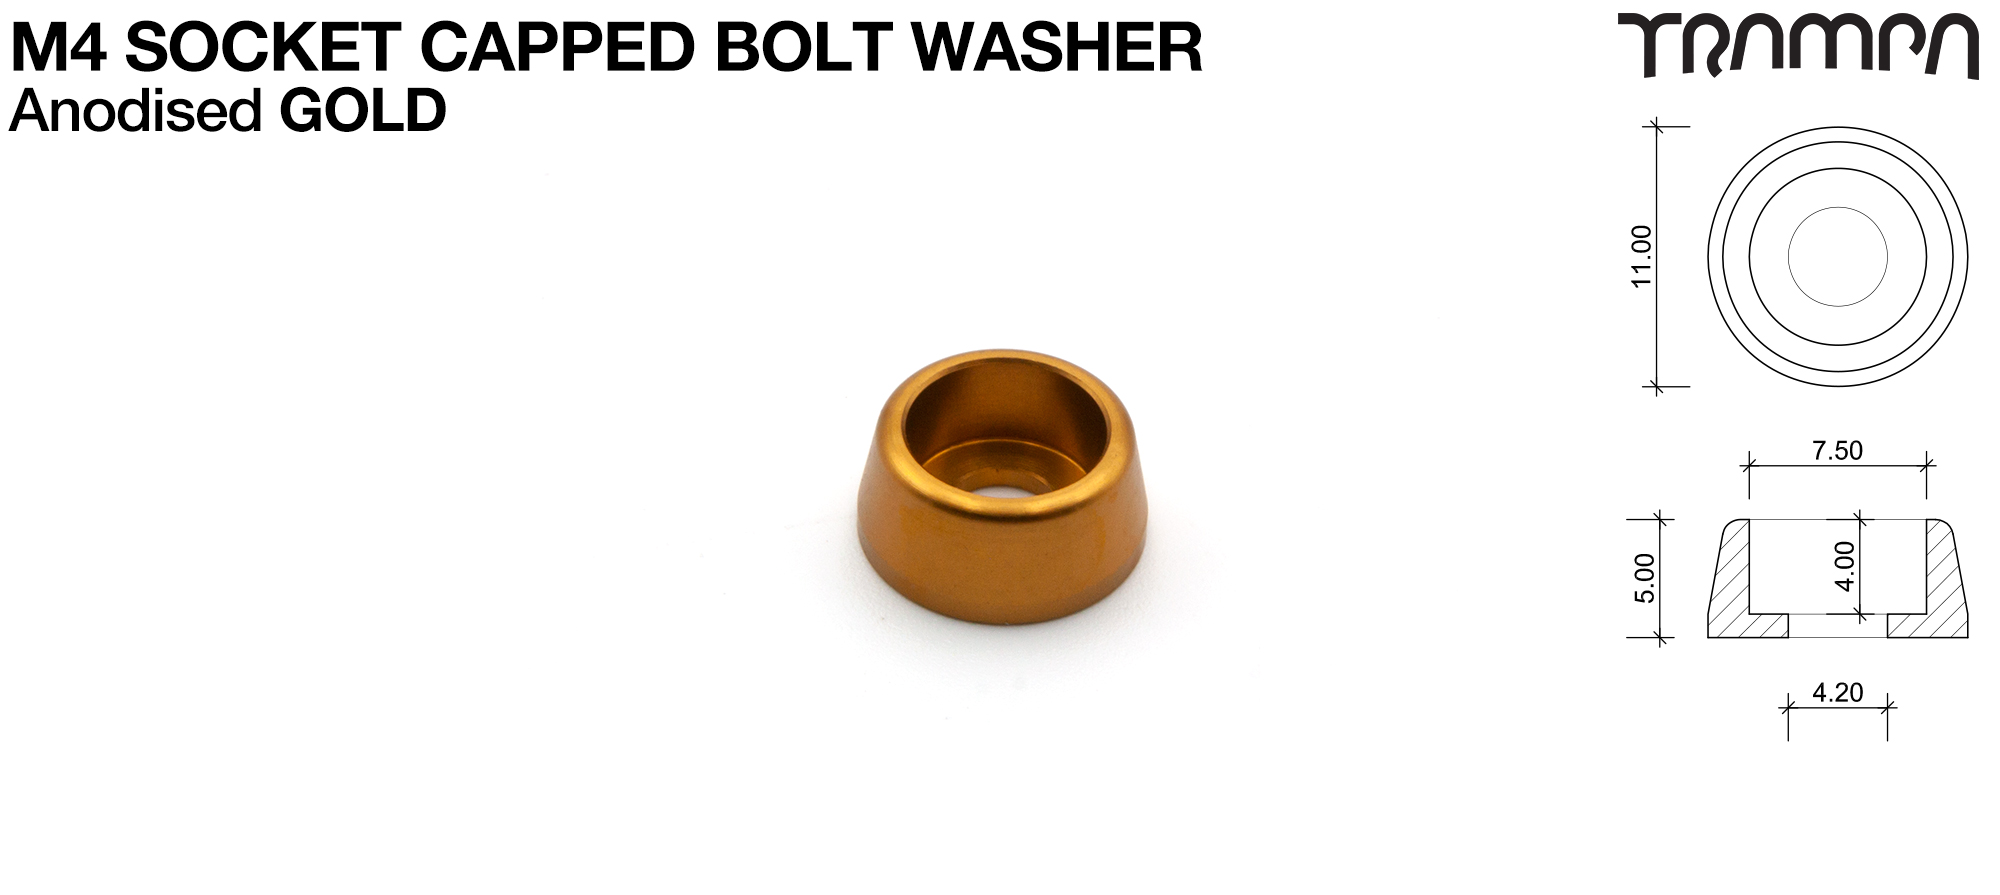 M4 Socket Capped Washer - Anodised GOLD